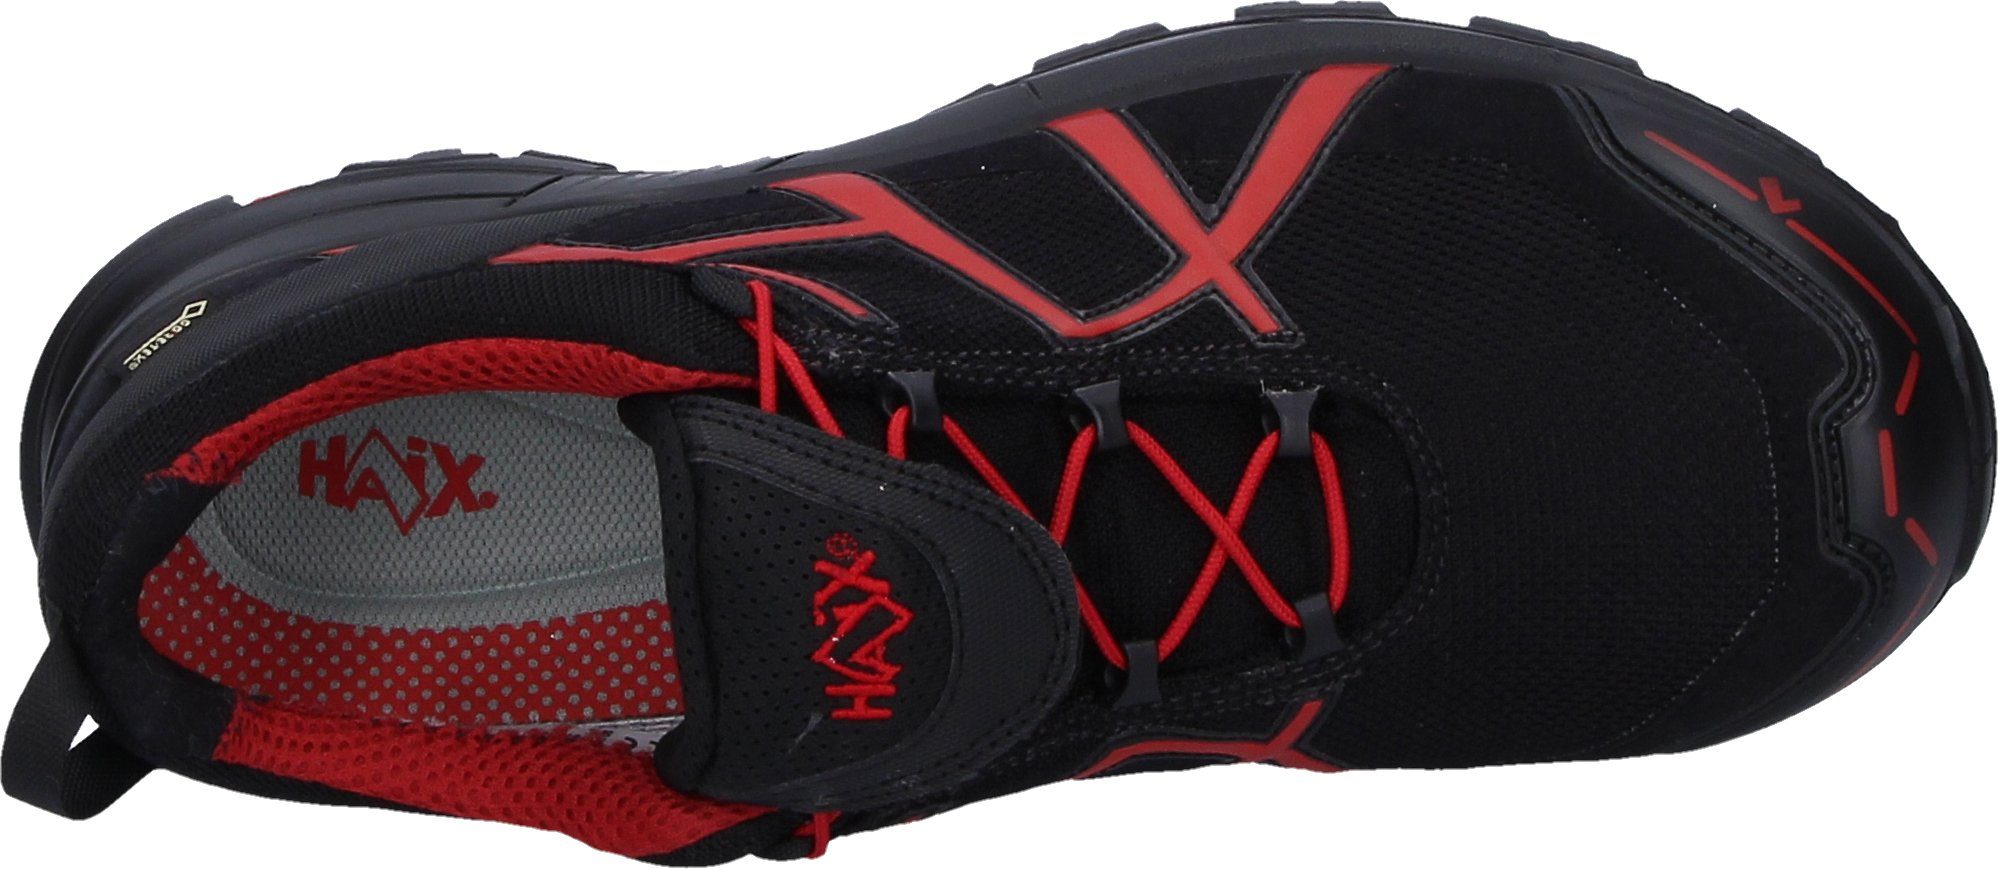 Black haix Eagle Arbeitsschuh low black/red Safety 40.1